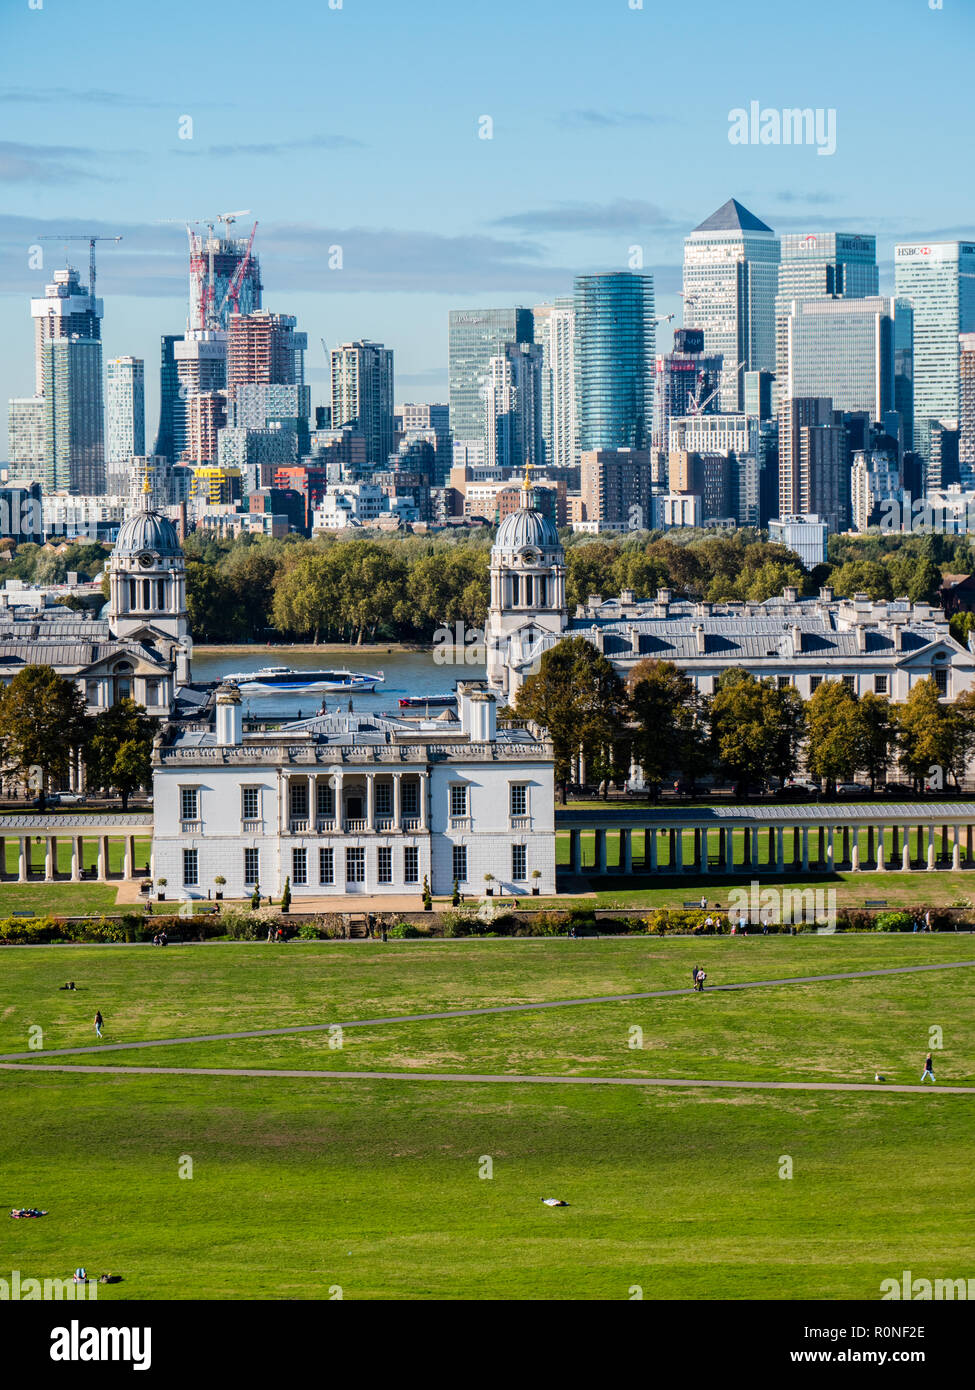 View from Royal Observatory, of Canary Wharf, London Docklands, with Queens House, and Old Royal Navel College, Greenwich, London, England. Uk, GB. Stock Photo